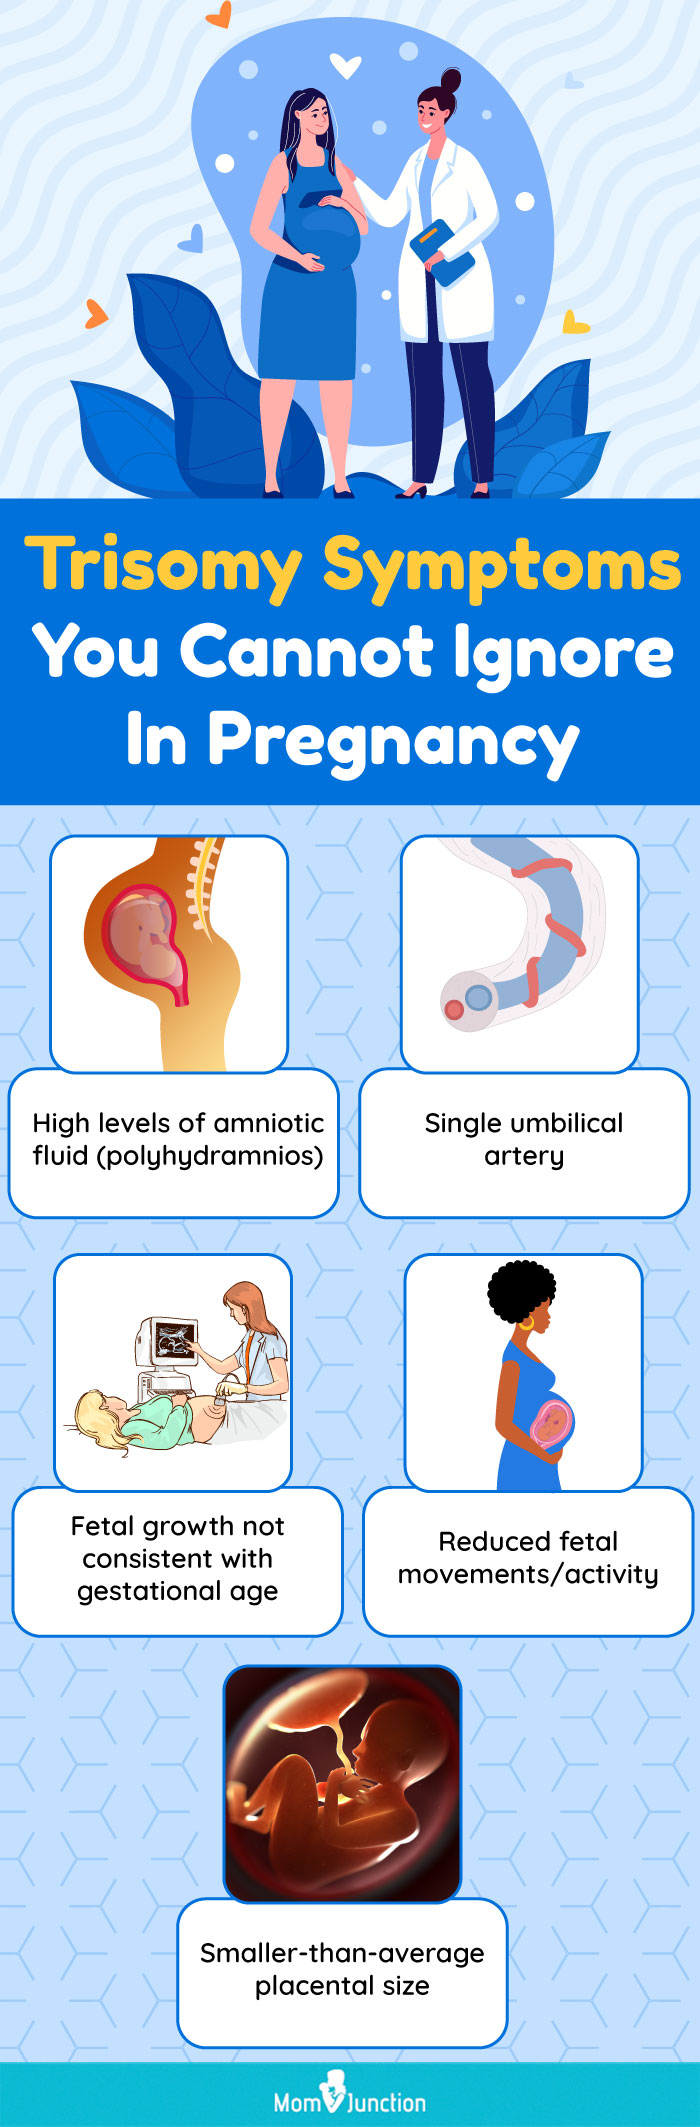 trisomy symptoms you cannot ignore while pregnant [infographic]